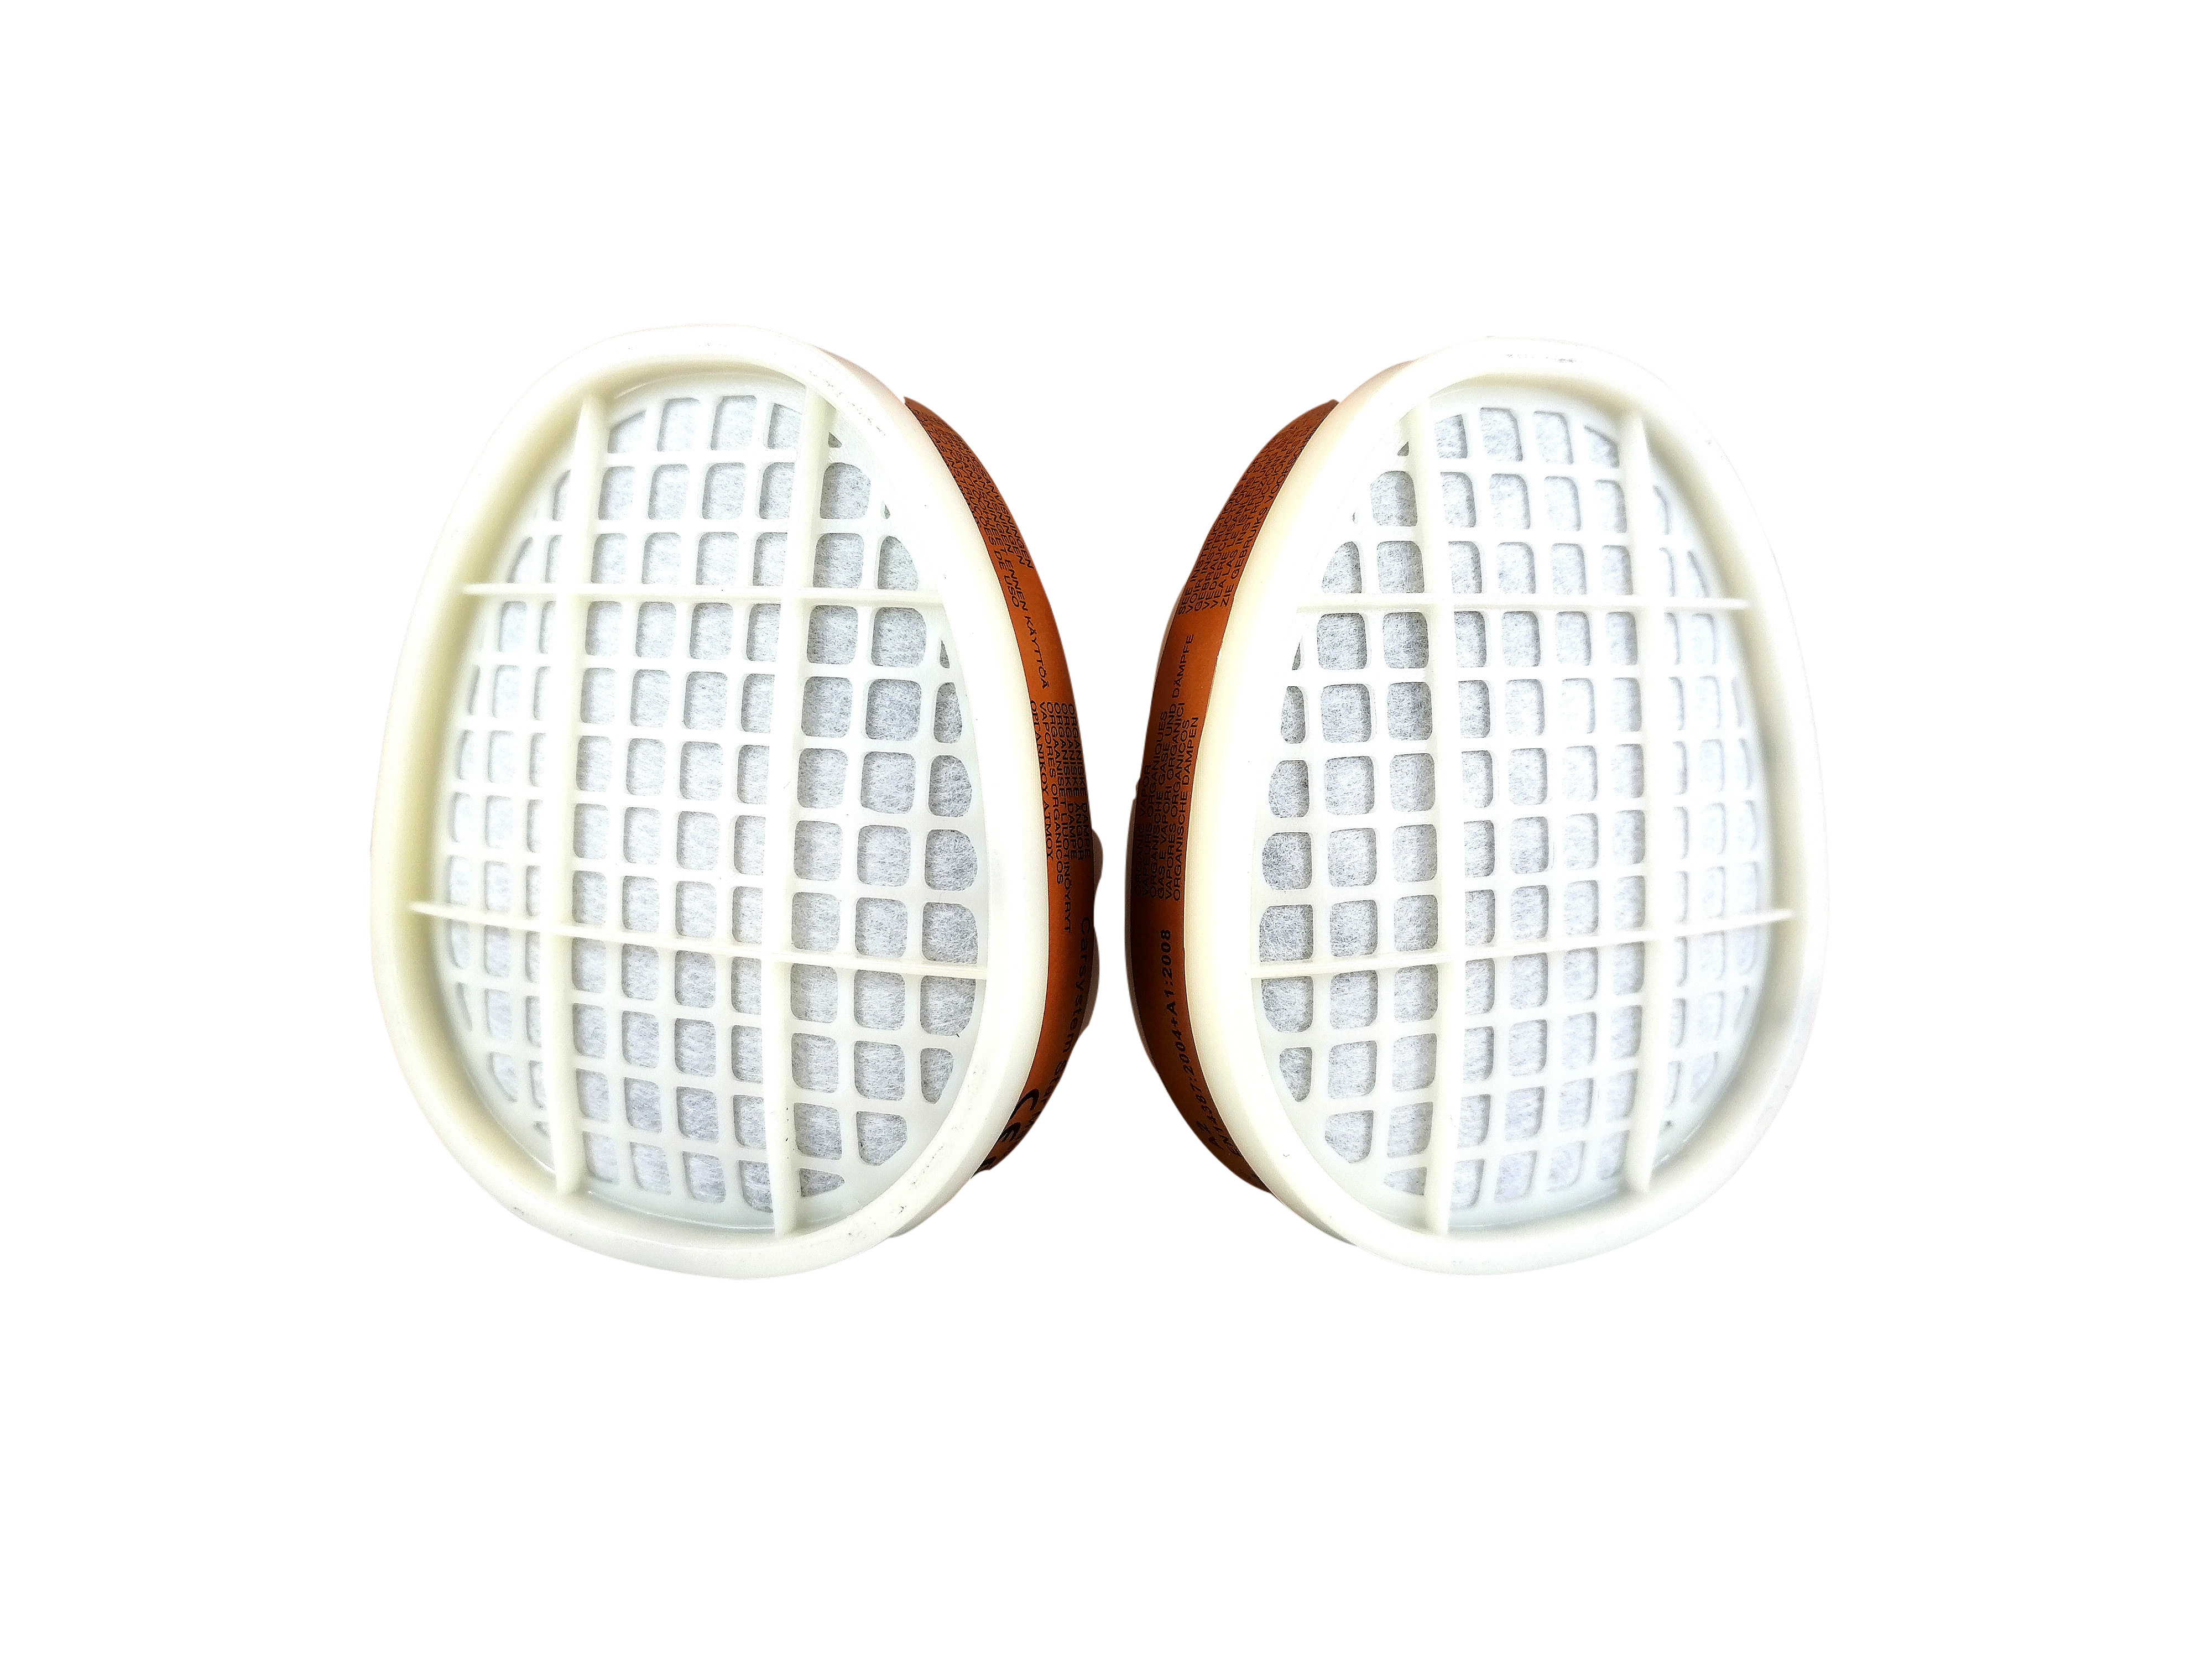 Filters for face mask - protecting mask for polyester